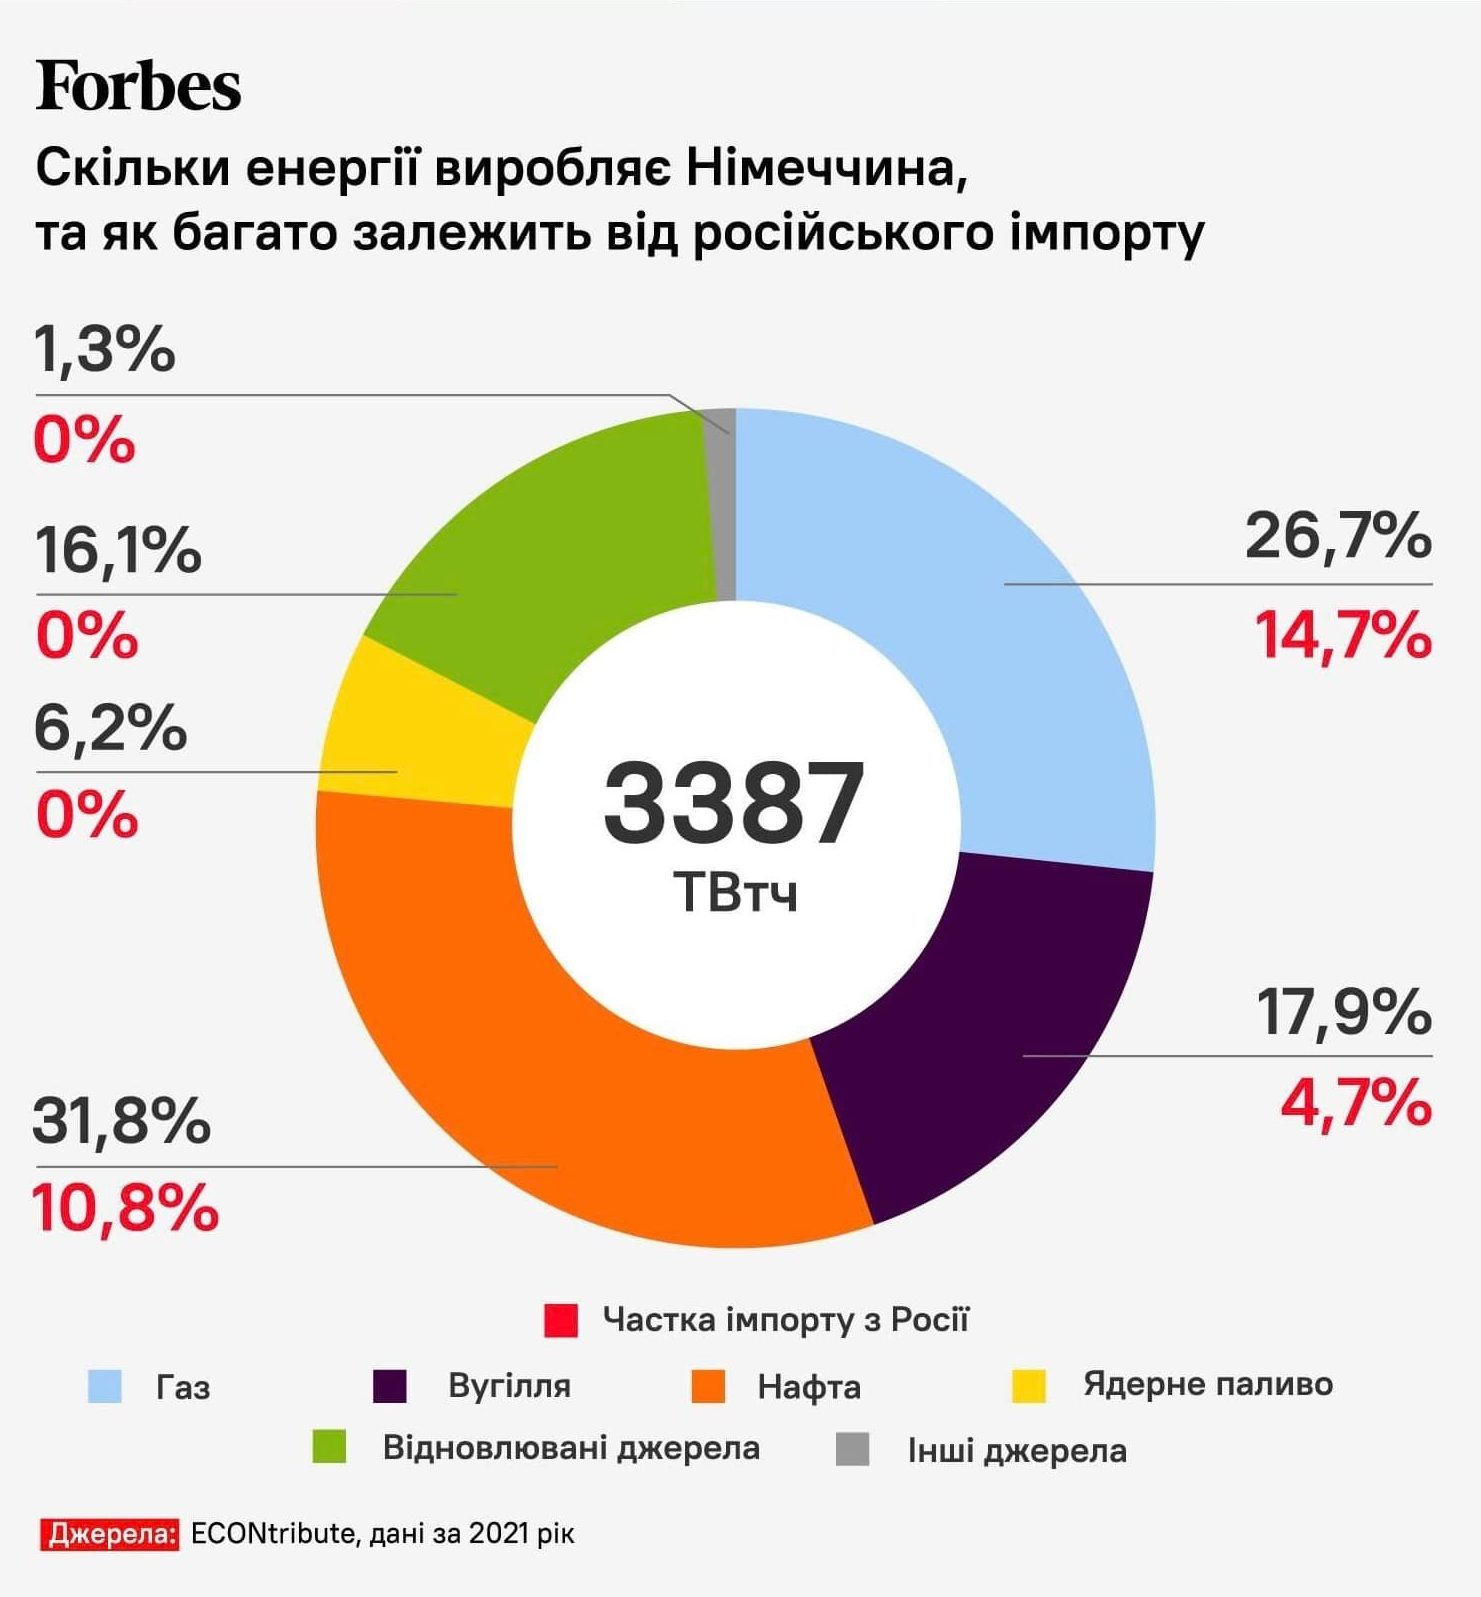 EU plan to stop Russian gas import - Forbes